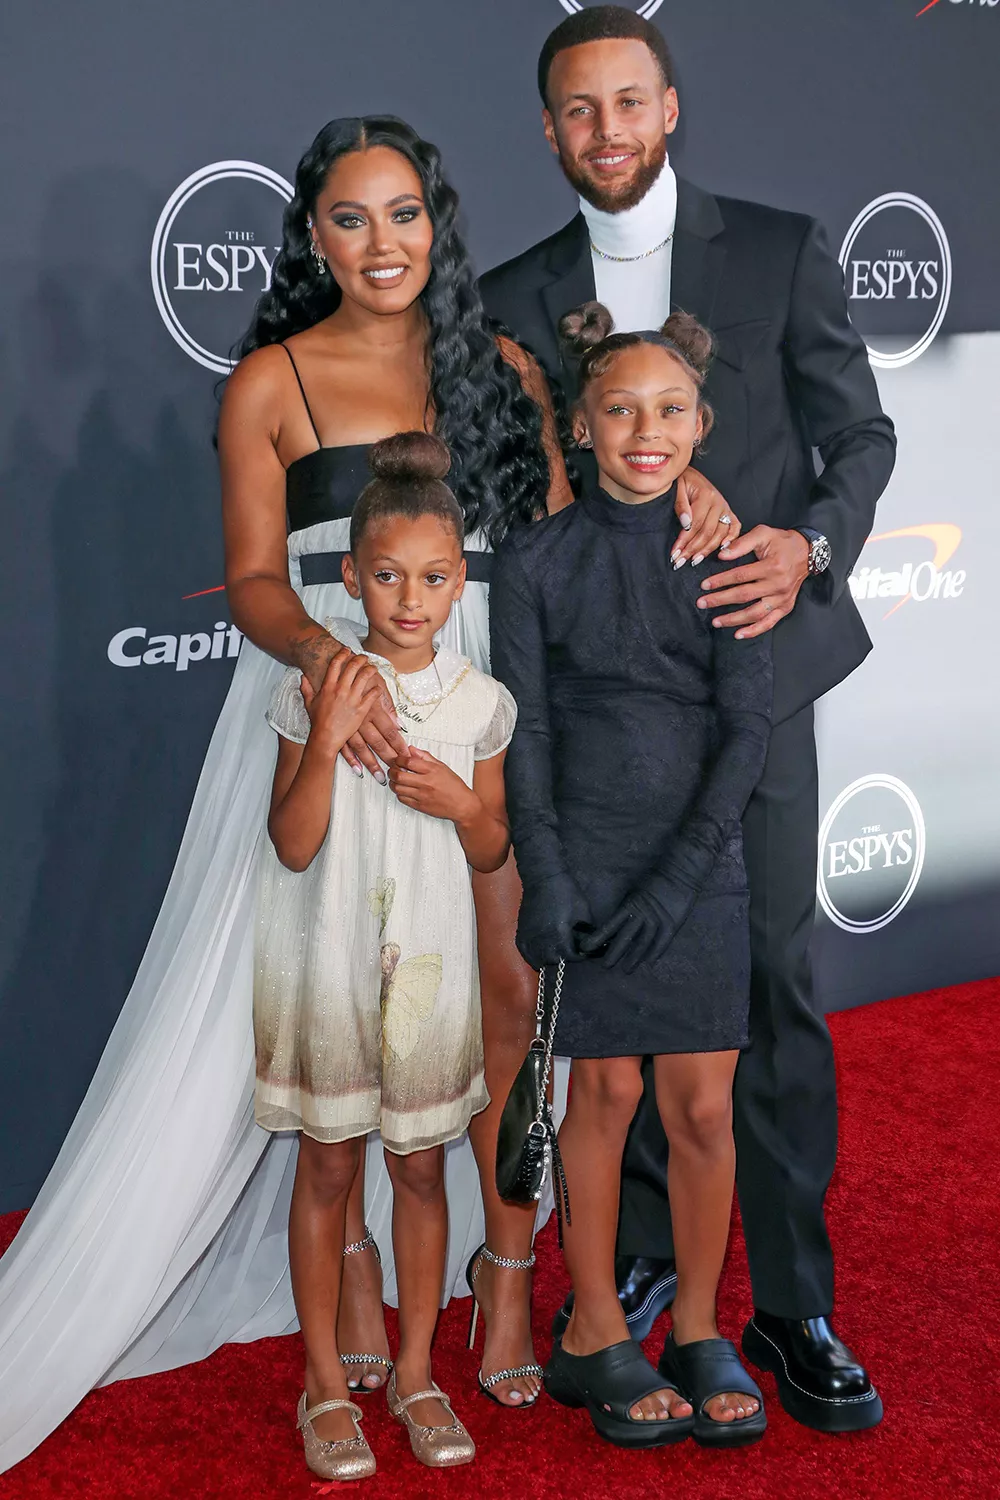 Mandatory Credit: Photo by Matt Baron/BEI/Shutterstock (13038671dp) Ayesha Curry, Stephen Curry and family ESPY Awards, Arrivals, Los Angeles, California, USA - 20 Jul 2022